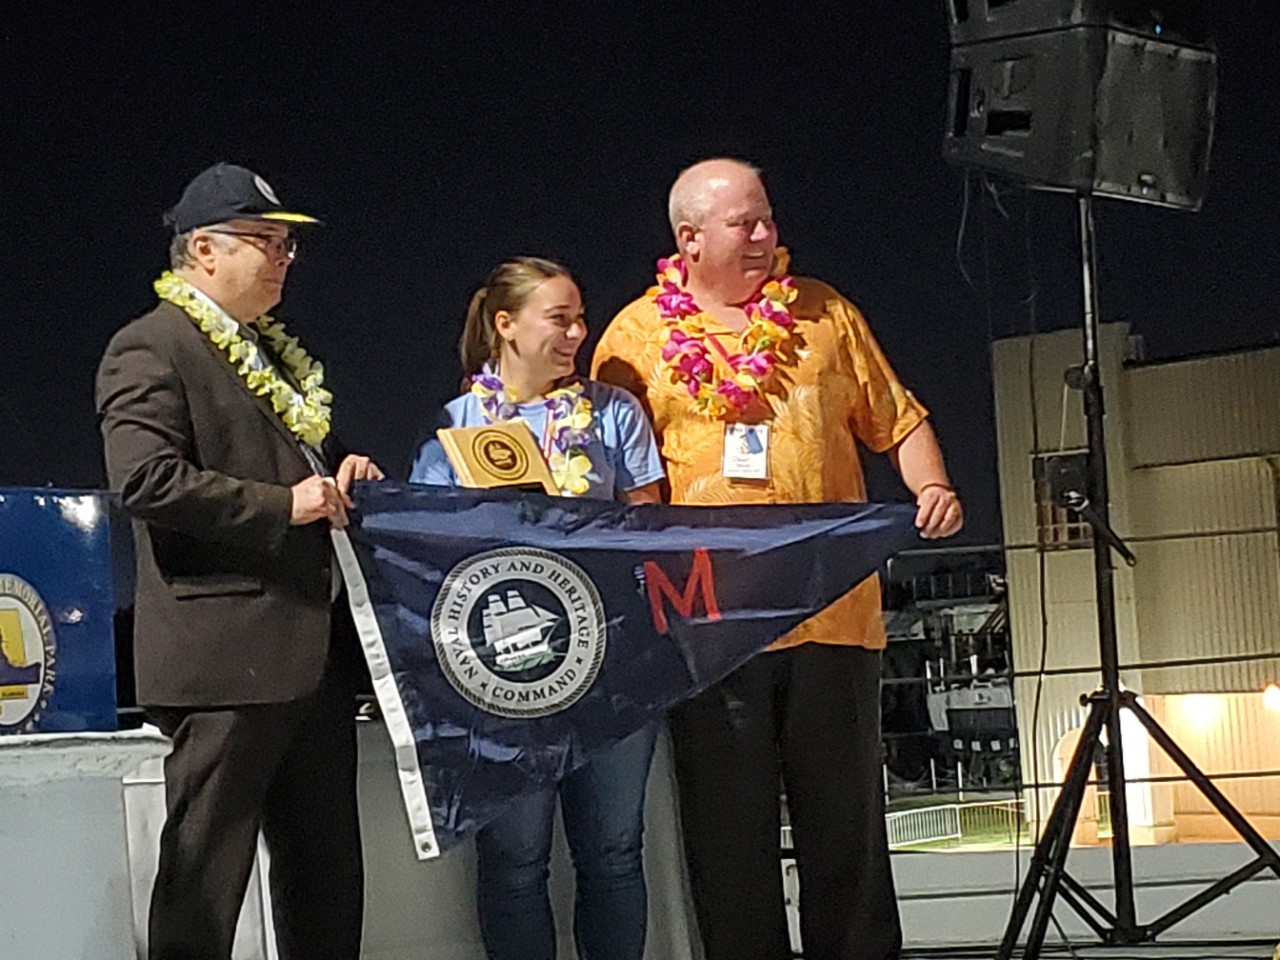 <p>MOBILE, Ala. (Sept. 25, 2021) Naval History and Heritage Command (NHHC) Director Samuel J. Cox, left, and NHHC Navy Museums Division Director Dave Adams present the “Maintenance Excellence Award” to Shanna Schuster, a representative for Destroyer Escort Historical Museum USS <i>Slater</i> (DE 766). NHHC presented the 2021 Museum Excellence Awards at the annual Historic Naval Ships Association Conference hosted at USS Alabama Battleship Memorial Park. (U.S. Navy photo/Released)</p>